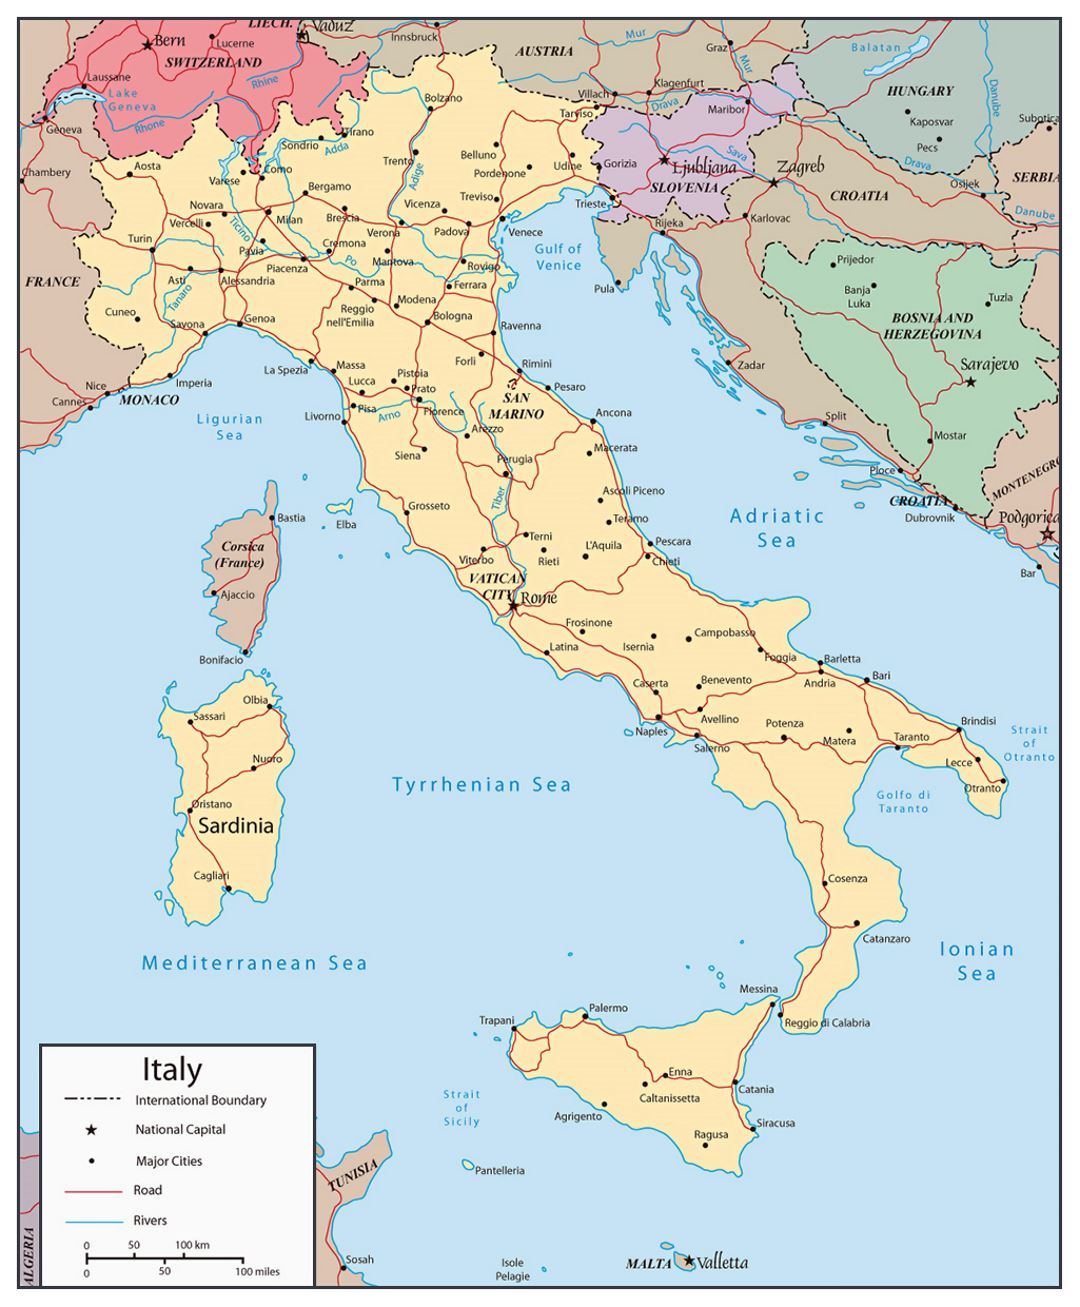 Detailed political map of Italy with roads, rivers and major cities